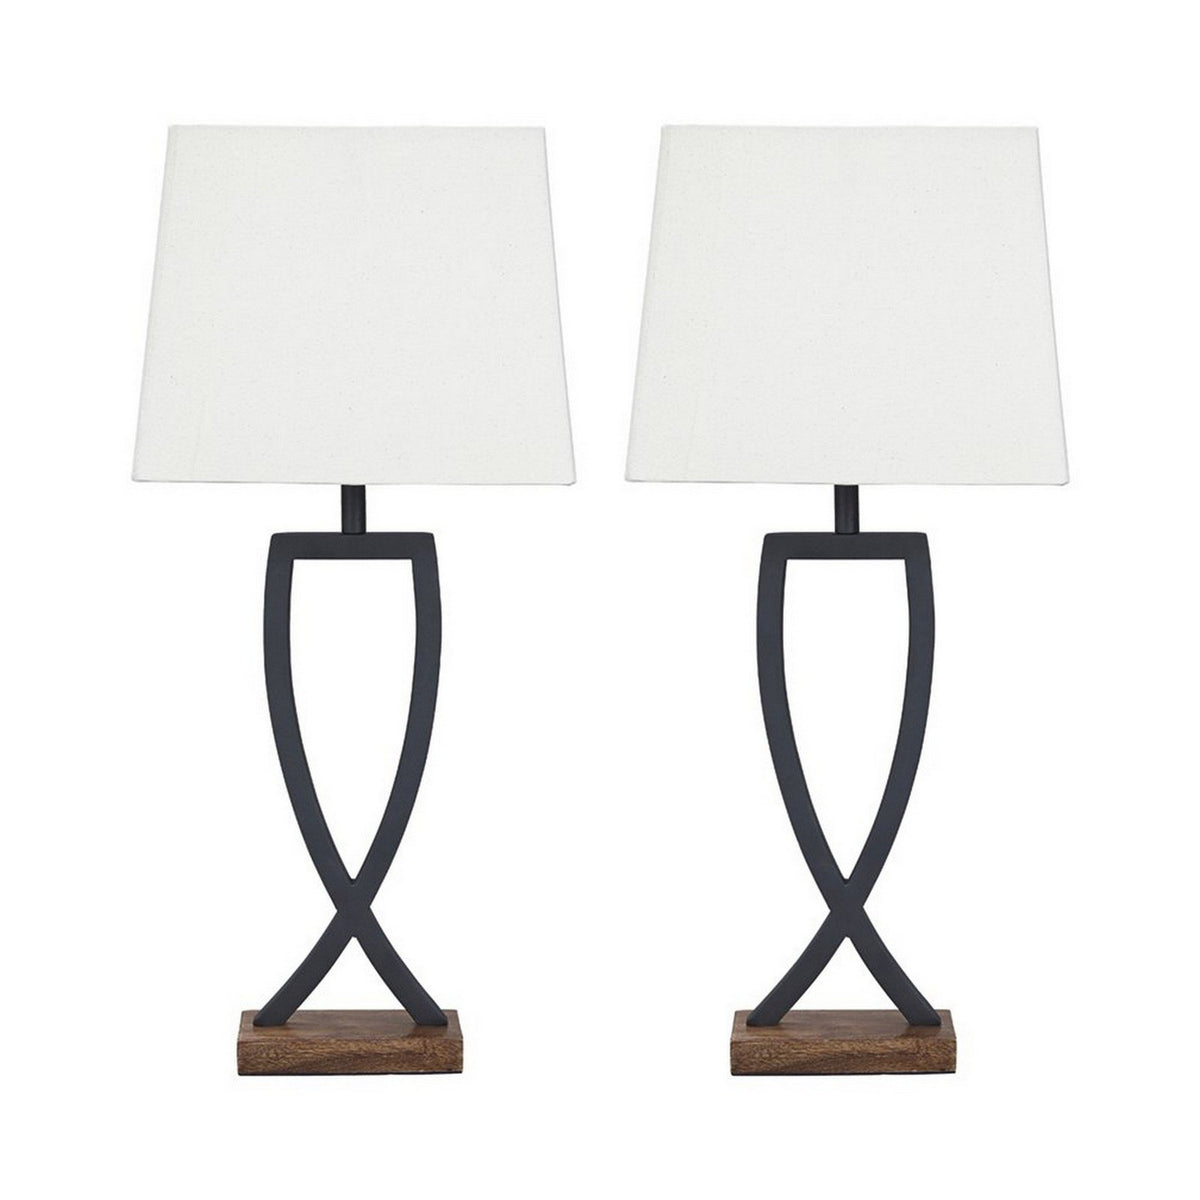 Criss Cross Metal Table Lamp with Fabric Shade, Set of 2, Gray and White - BM227192